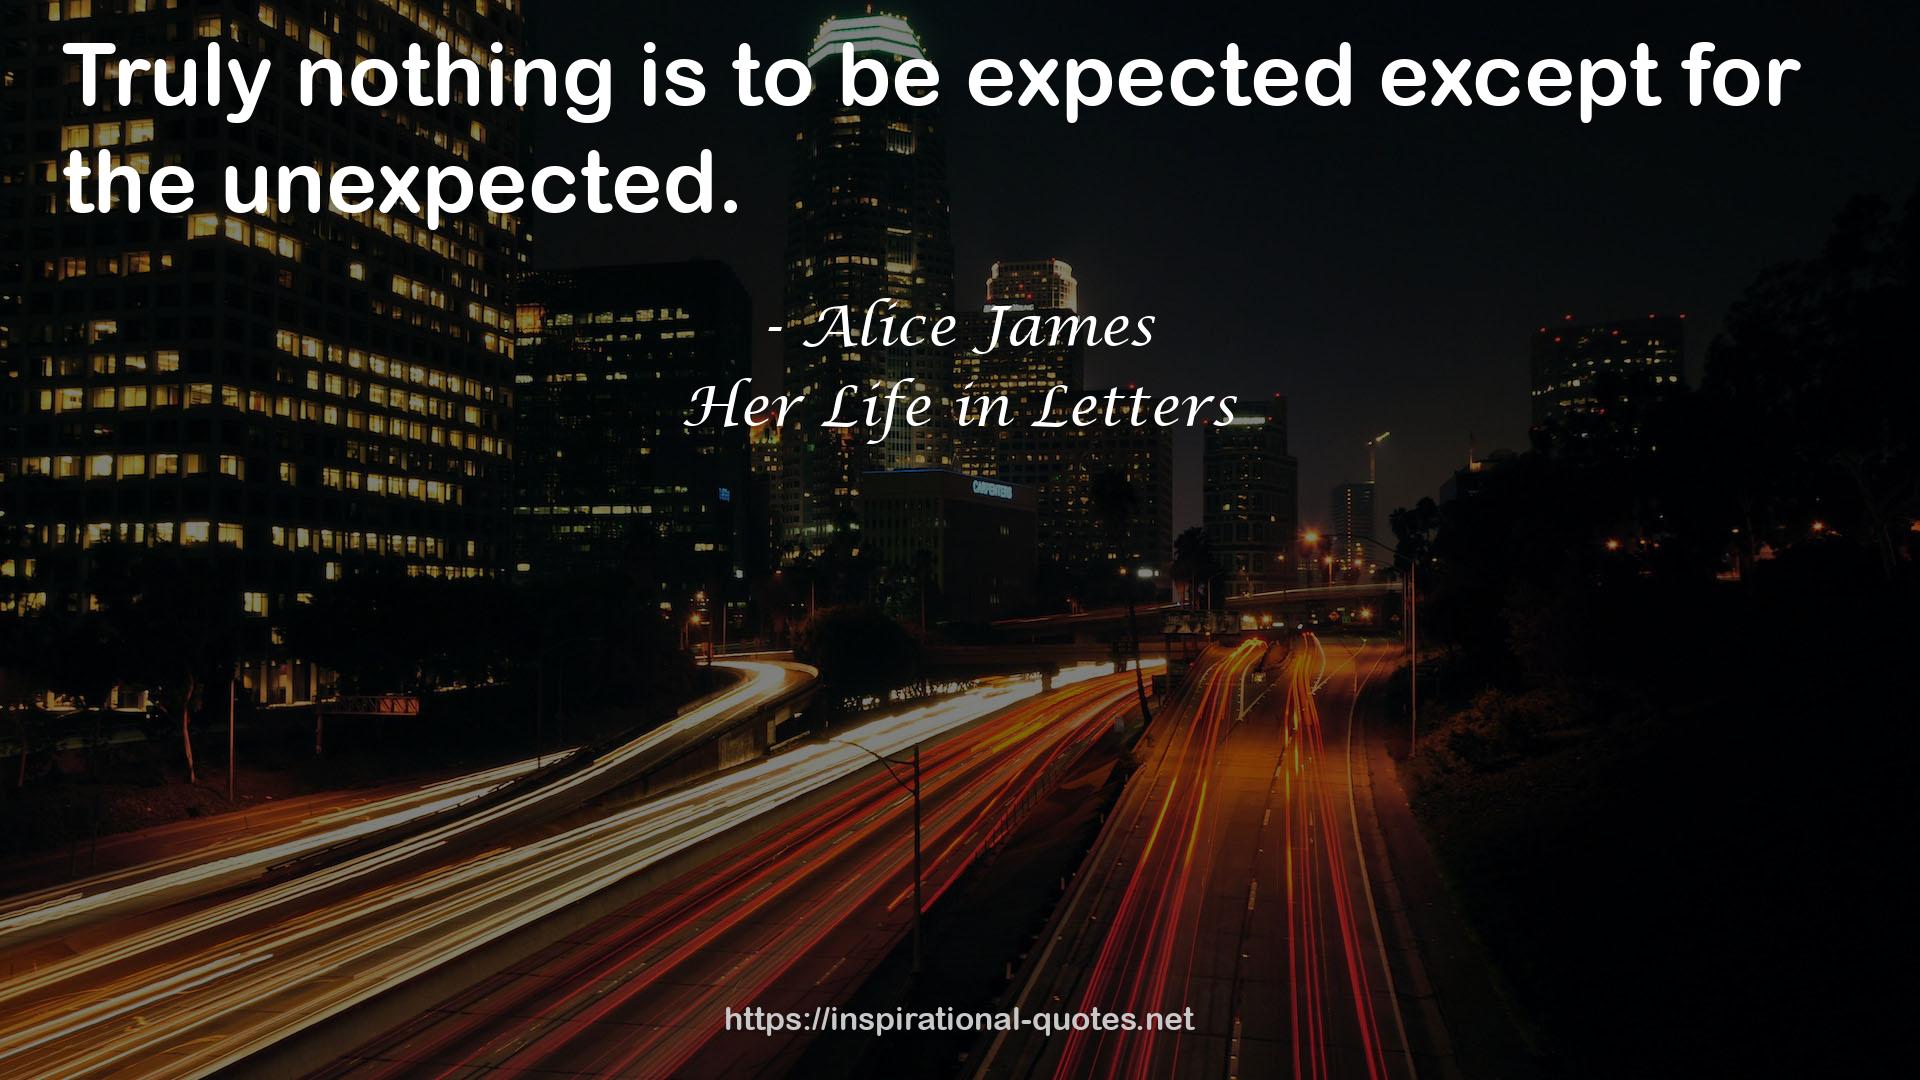 Her Life in Letters QUOTES